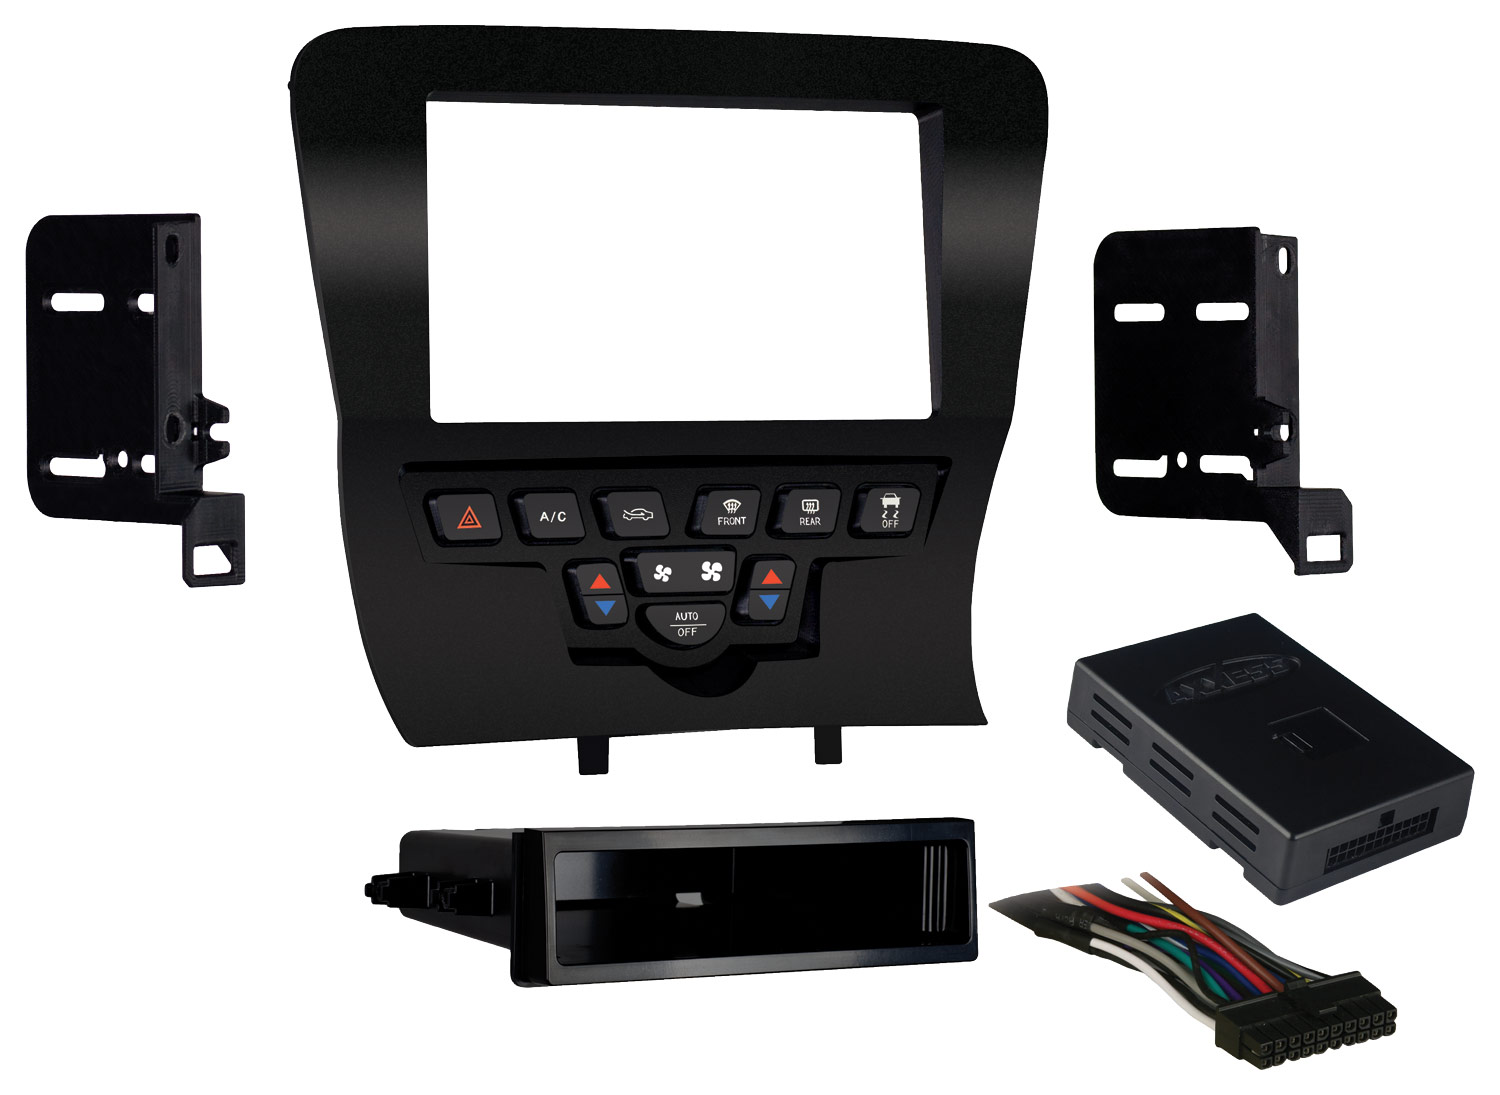 Metra - Dash Kit for Select 2011-2014 Dodge Charger with 4.3 inch screen - Matte Black was $599.99 now $449.99 (25.0% off)